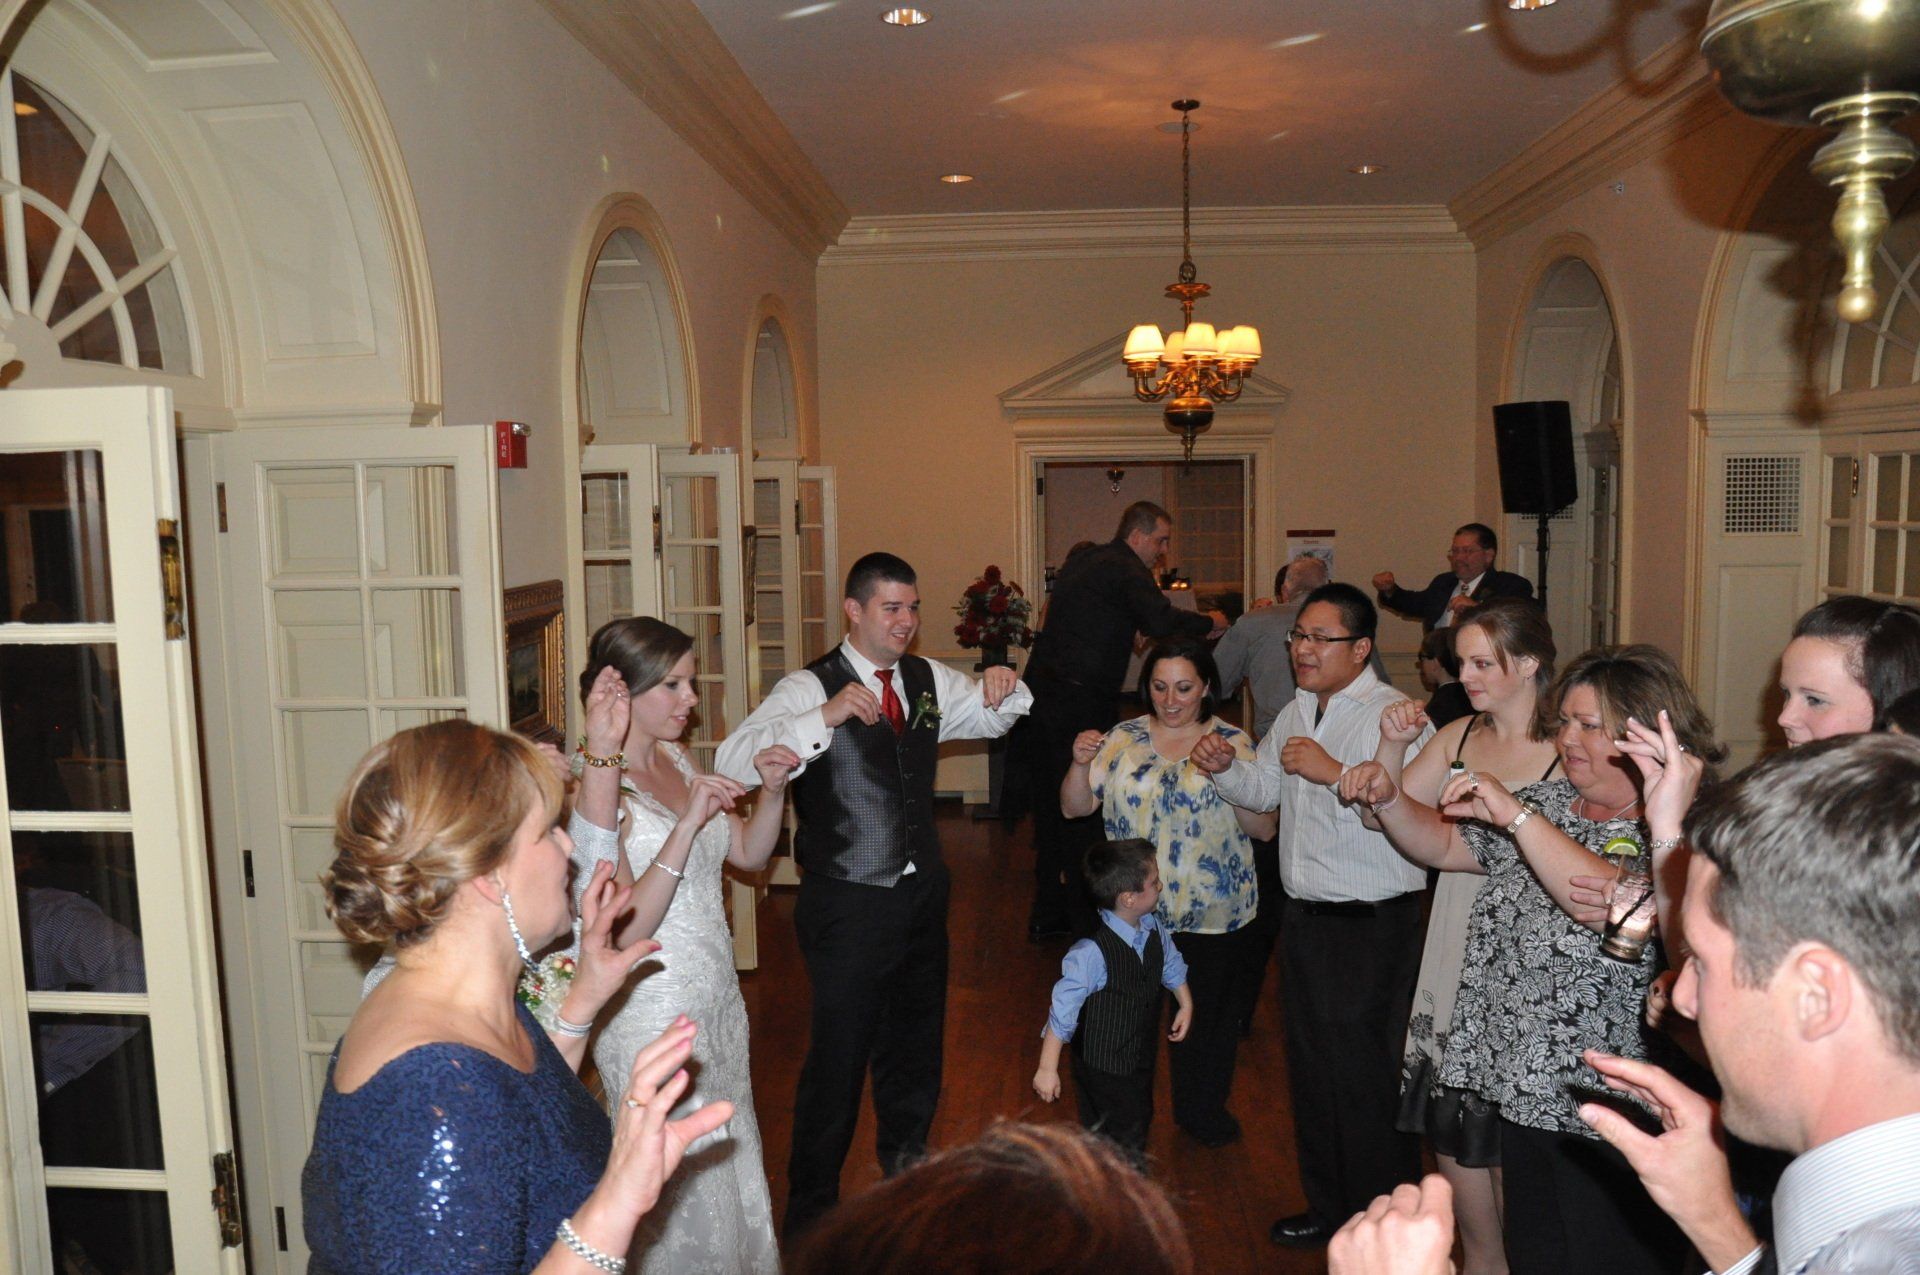 wedding guests dancing at exeter inn, exeter, New Hampshire